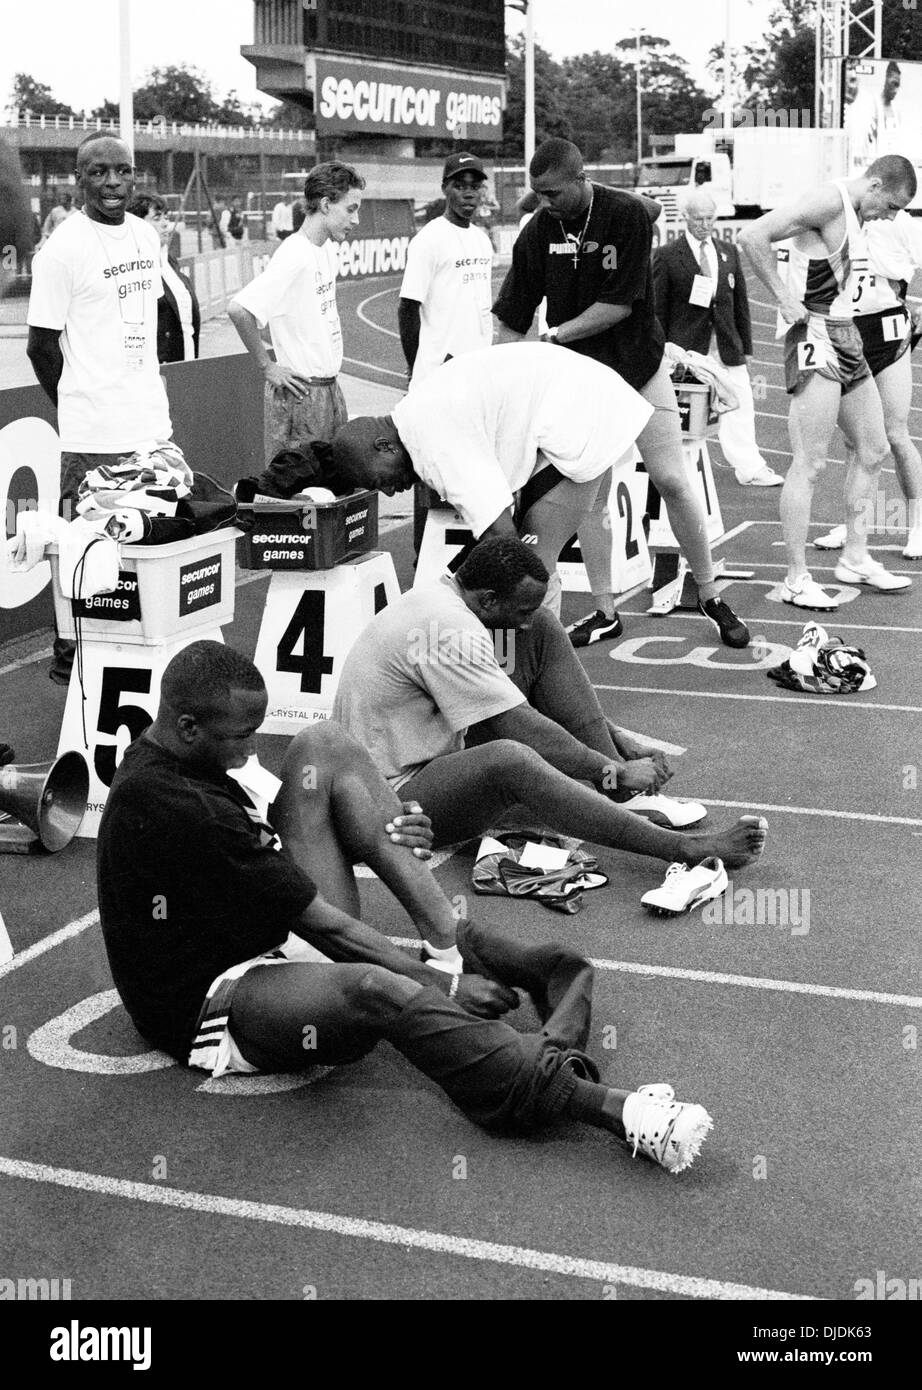 British 100m sprinter Linford Christie competing at the Securicor Games at Crystal Palace, London in 1996 Stock Photo